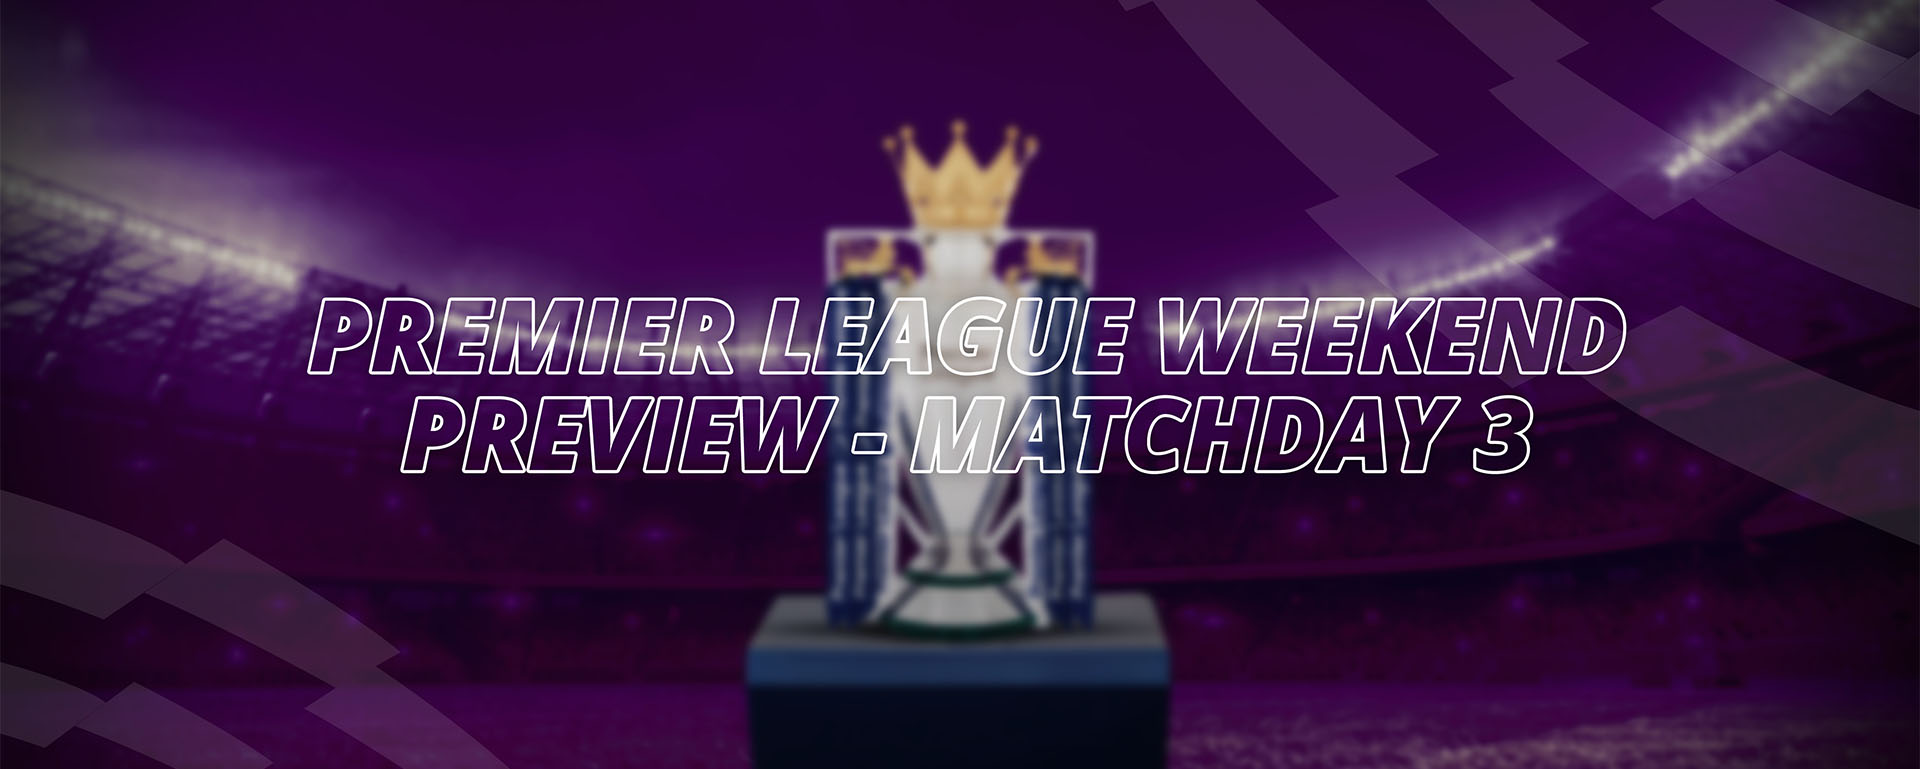 PREMIER LEAGUE WEEKEND PREVIEW – MATCHDAY 3